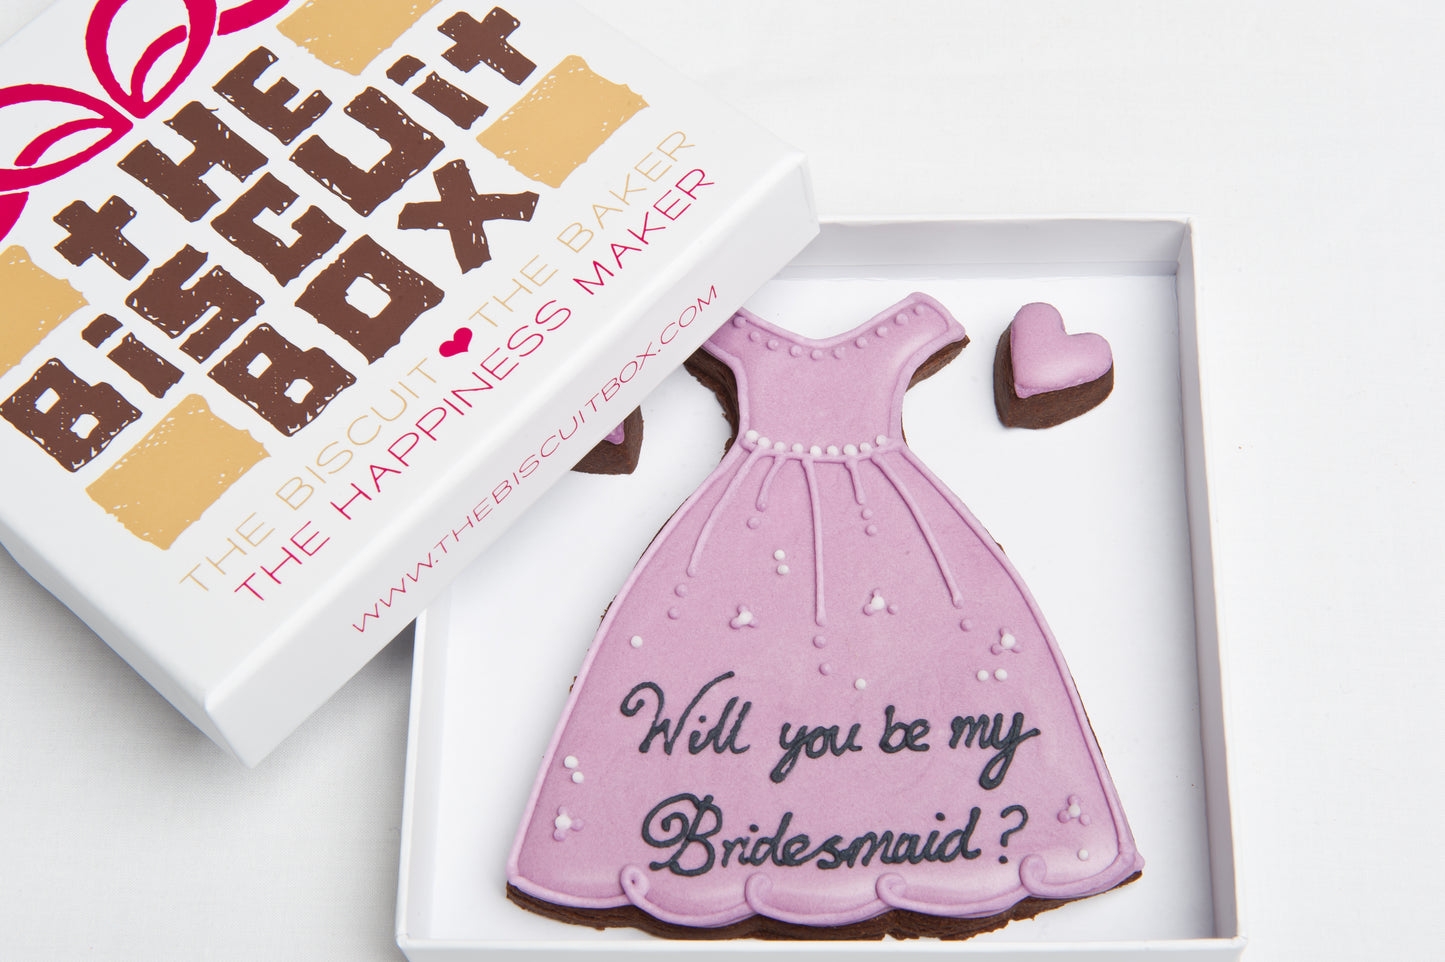 will you be my bridesmaid cookies. Bridesmaid proposal cookies in a small box to send through the post.